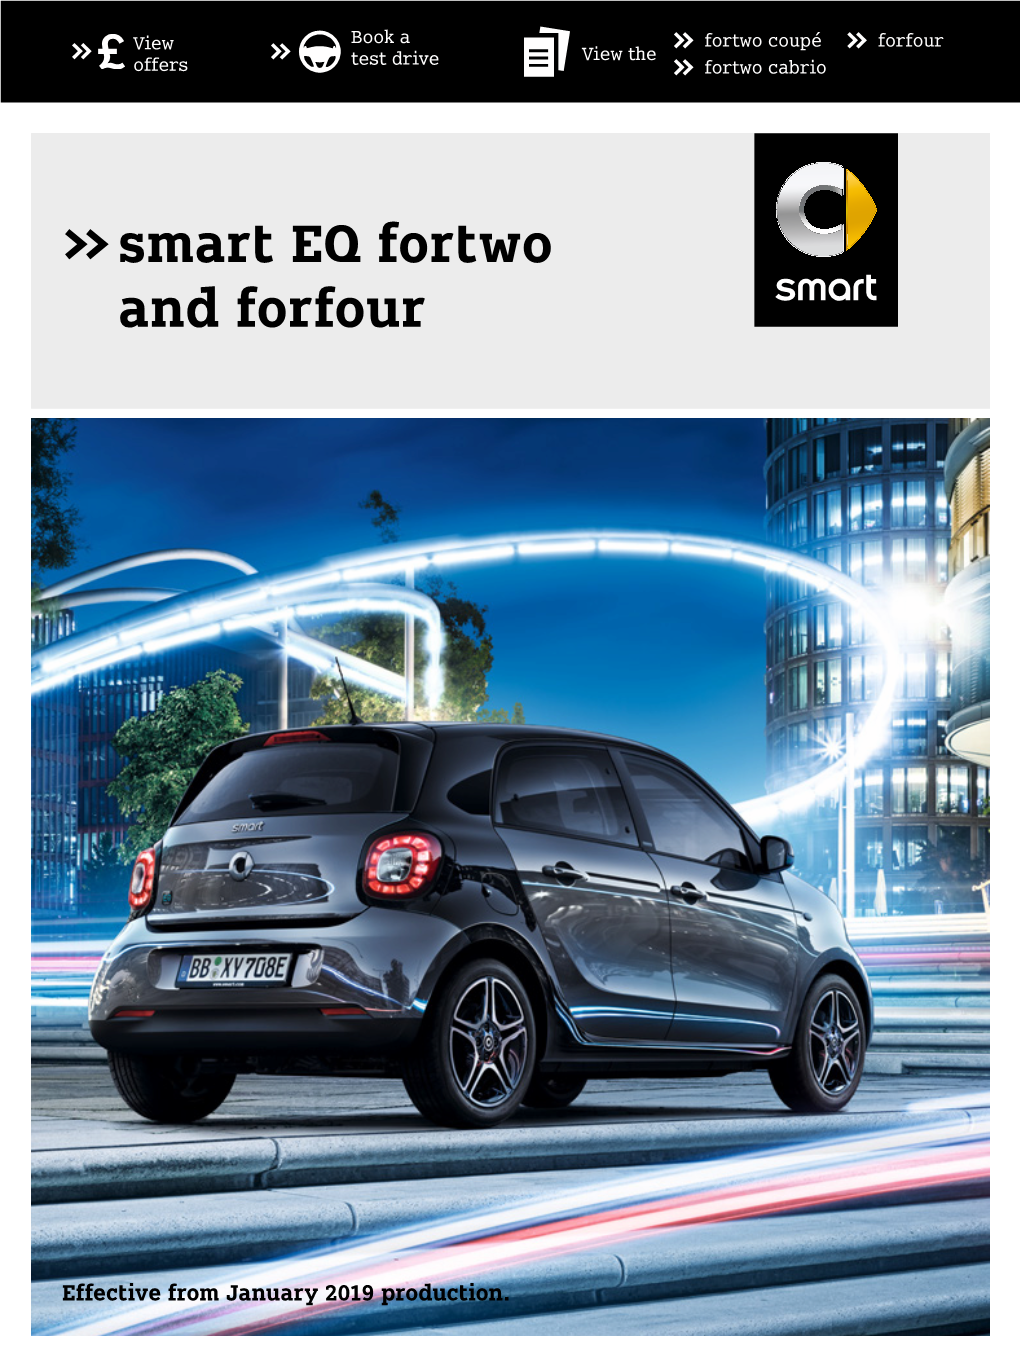 Smart EQ Fortwo and Forfour